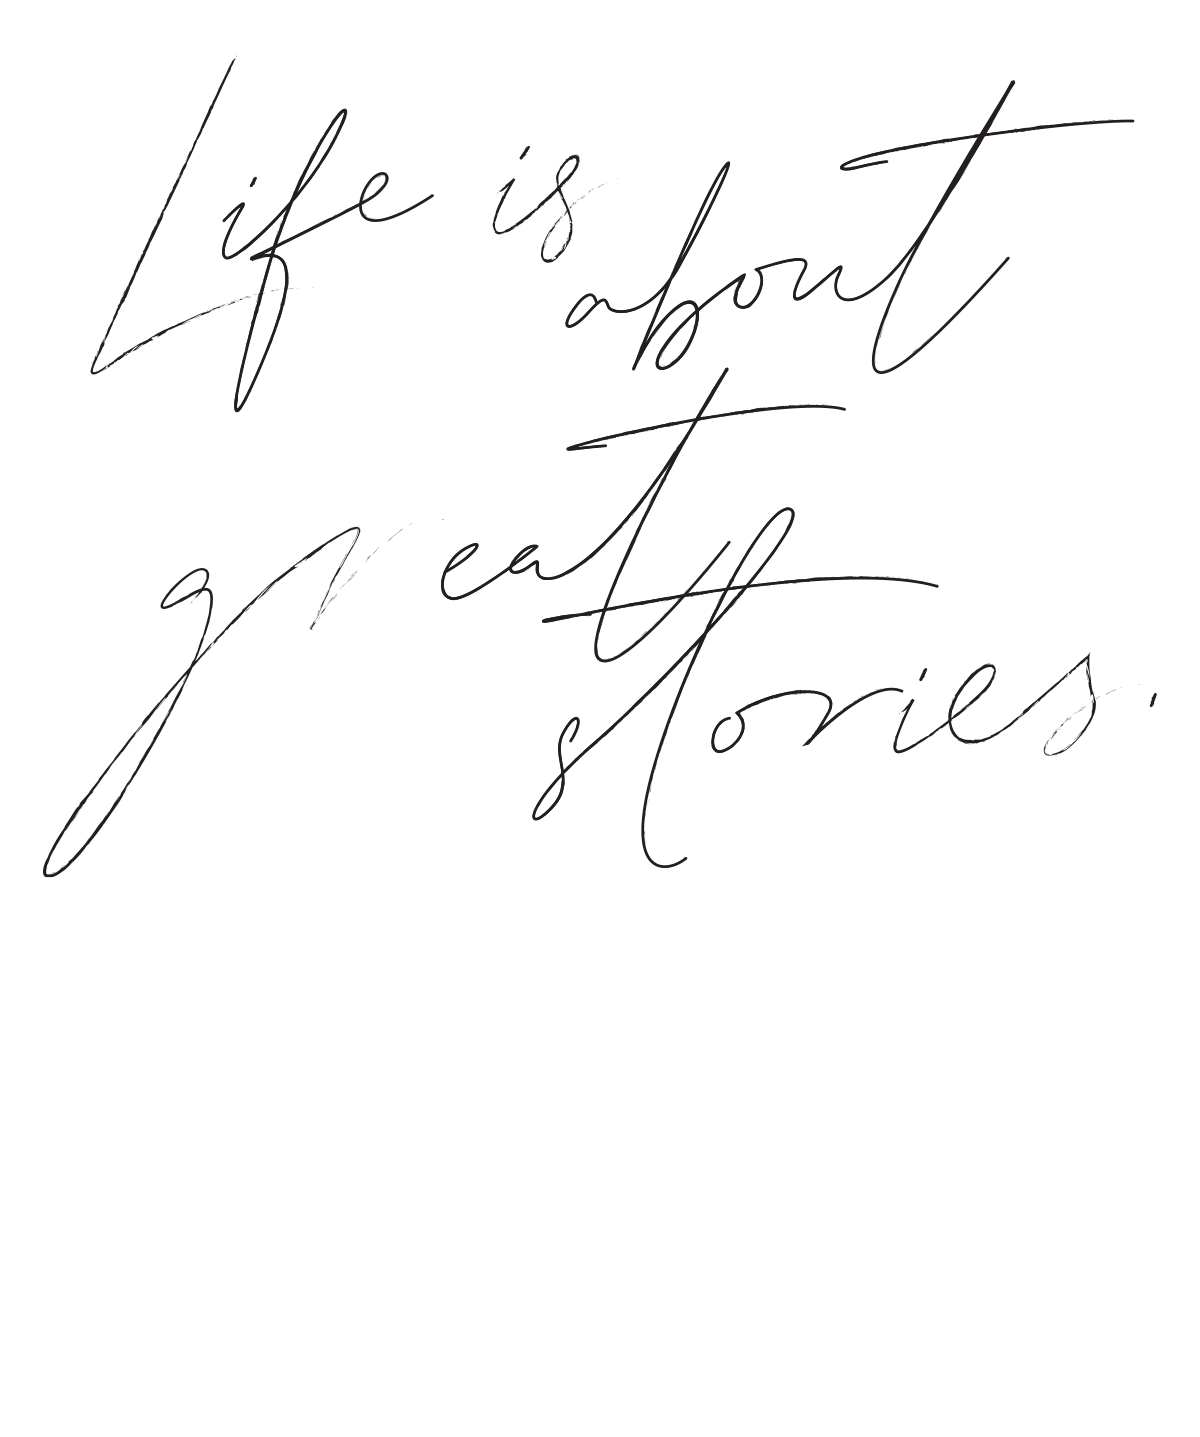 Life is about great stories